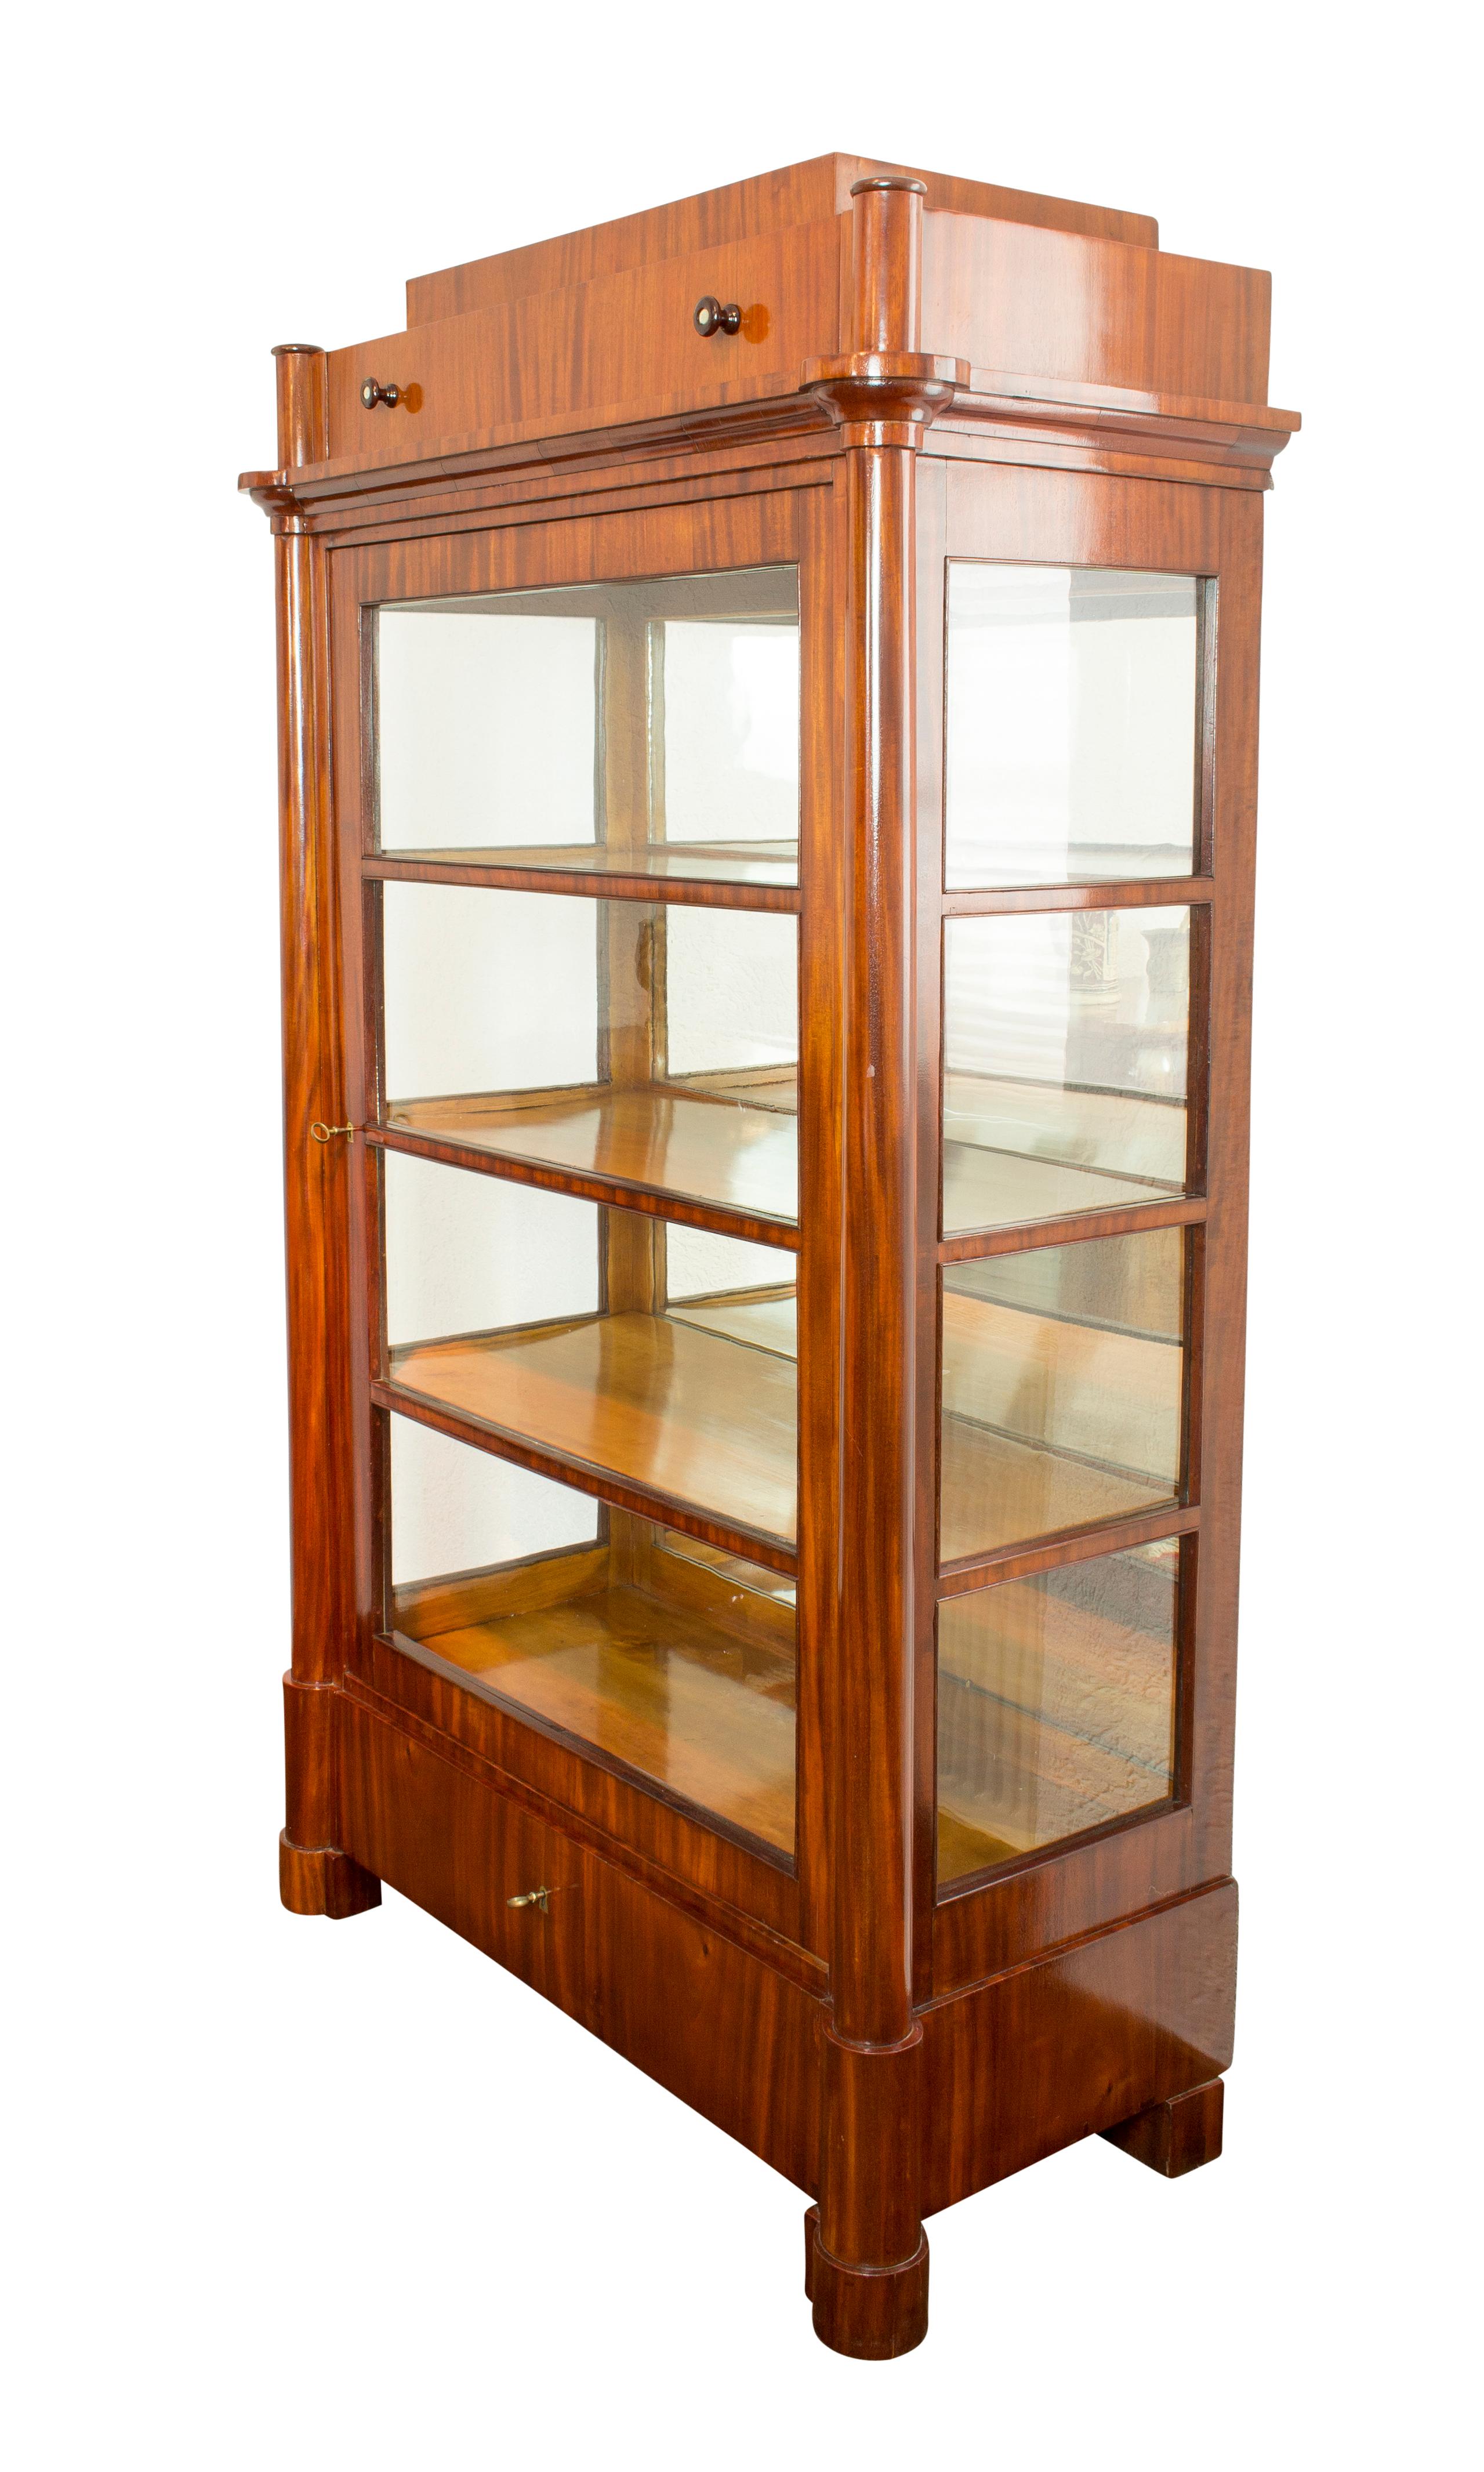 Very nice showcase with 3 sides glass. The showcase is from the time of the Biedermeier from Germany, Berlin. The showcase is made of pine wood covered with nutwood veneer. The shelves are made of birch wood, which has a very nice contrast to the